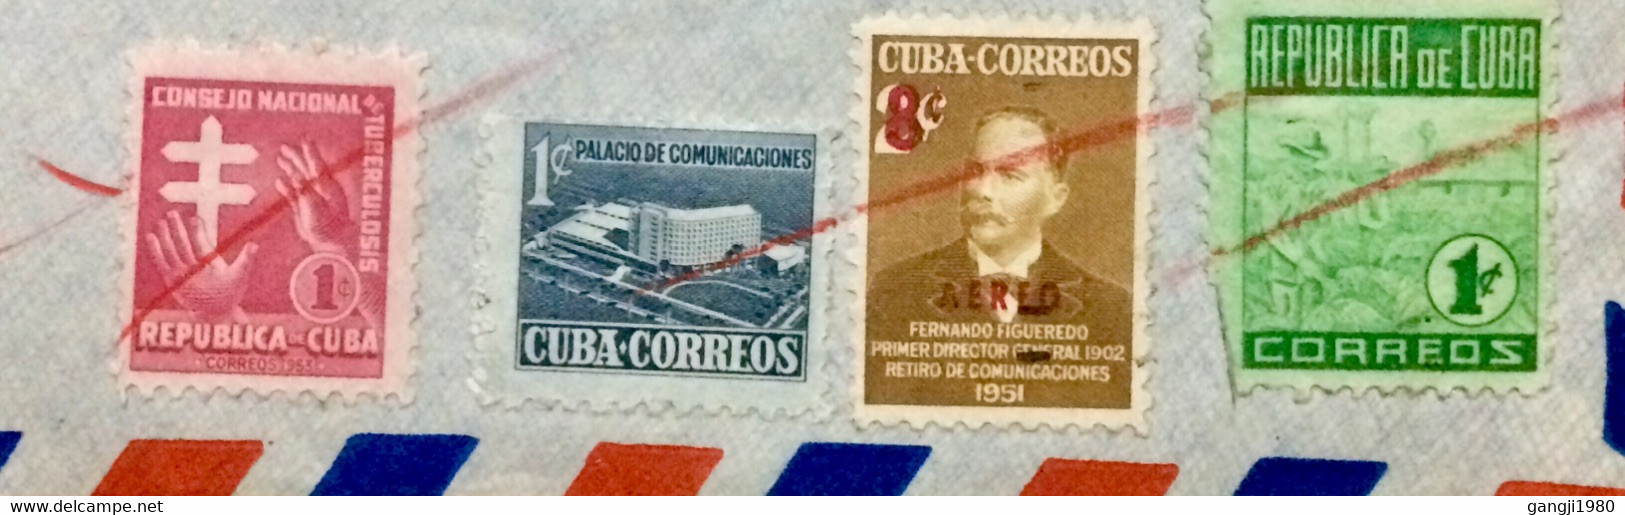 CUBA 1952, COVER USED TO USA, F.FIGUEREDO STAMP OVPTD, POST BUILDING, TOBACCO, TUBERCULOSIS, NEW YORK, OLD CHELSEA STATI - Covers & Documents